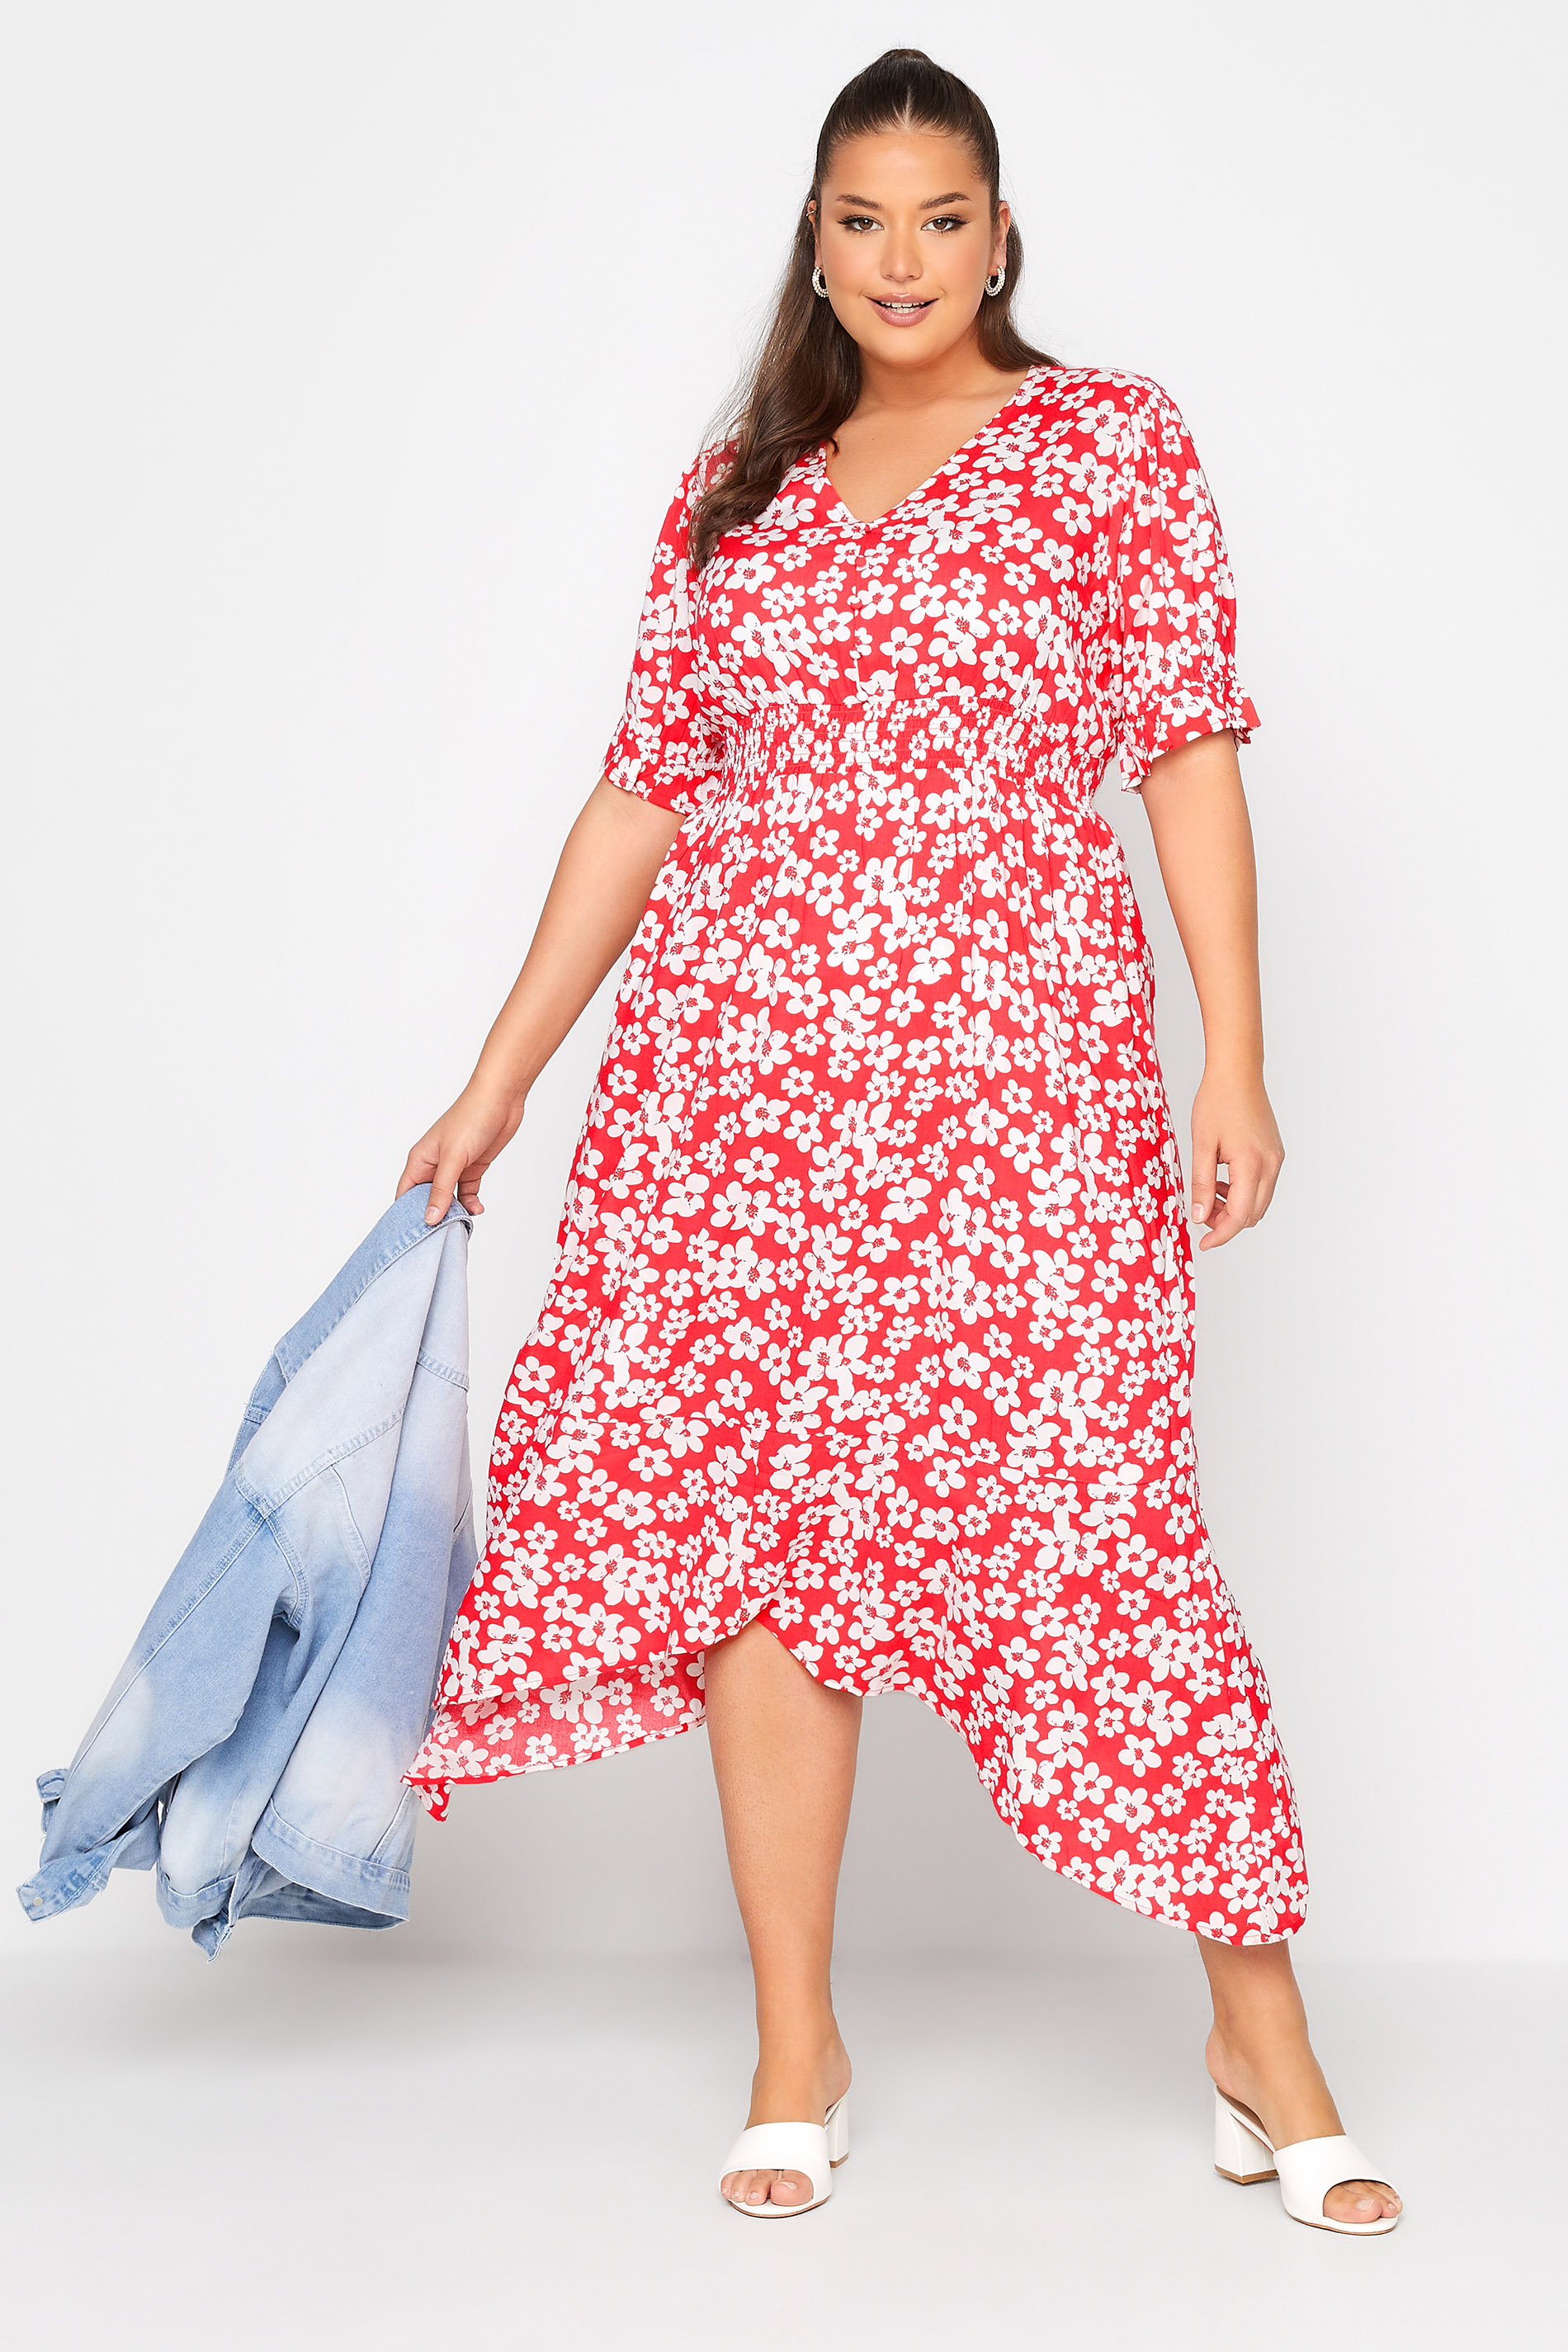 Robes Grande Taille Grande taille  Robes Imprimé Floral | LIMITED COLLECTION - Robe Rouge Floral Ourlet Roulanté Cache-Coeur - CT27946